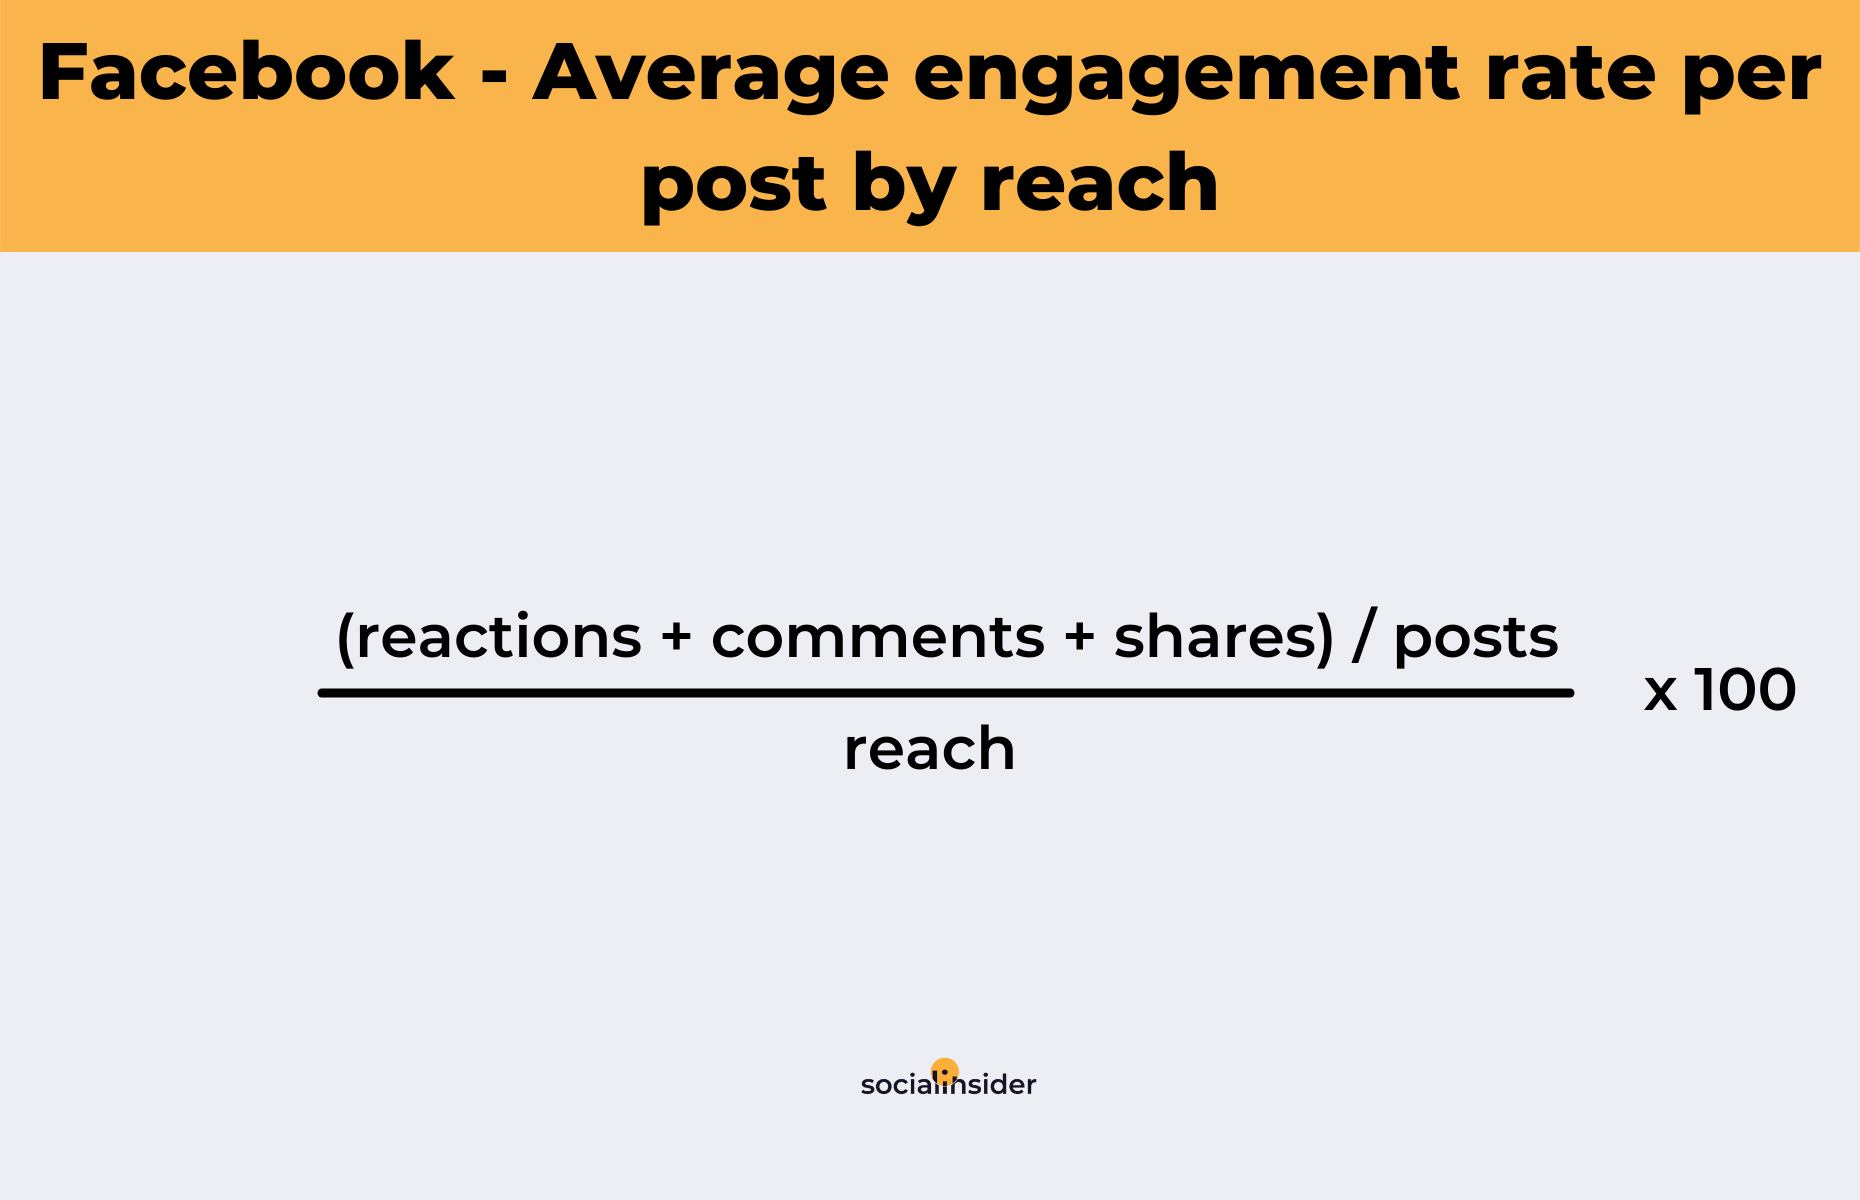 How to calculate the average engagement rate by reach on Facebook